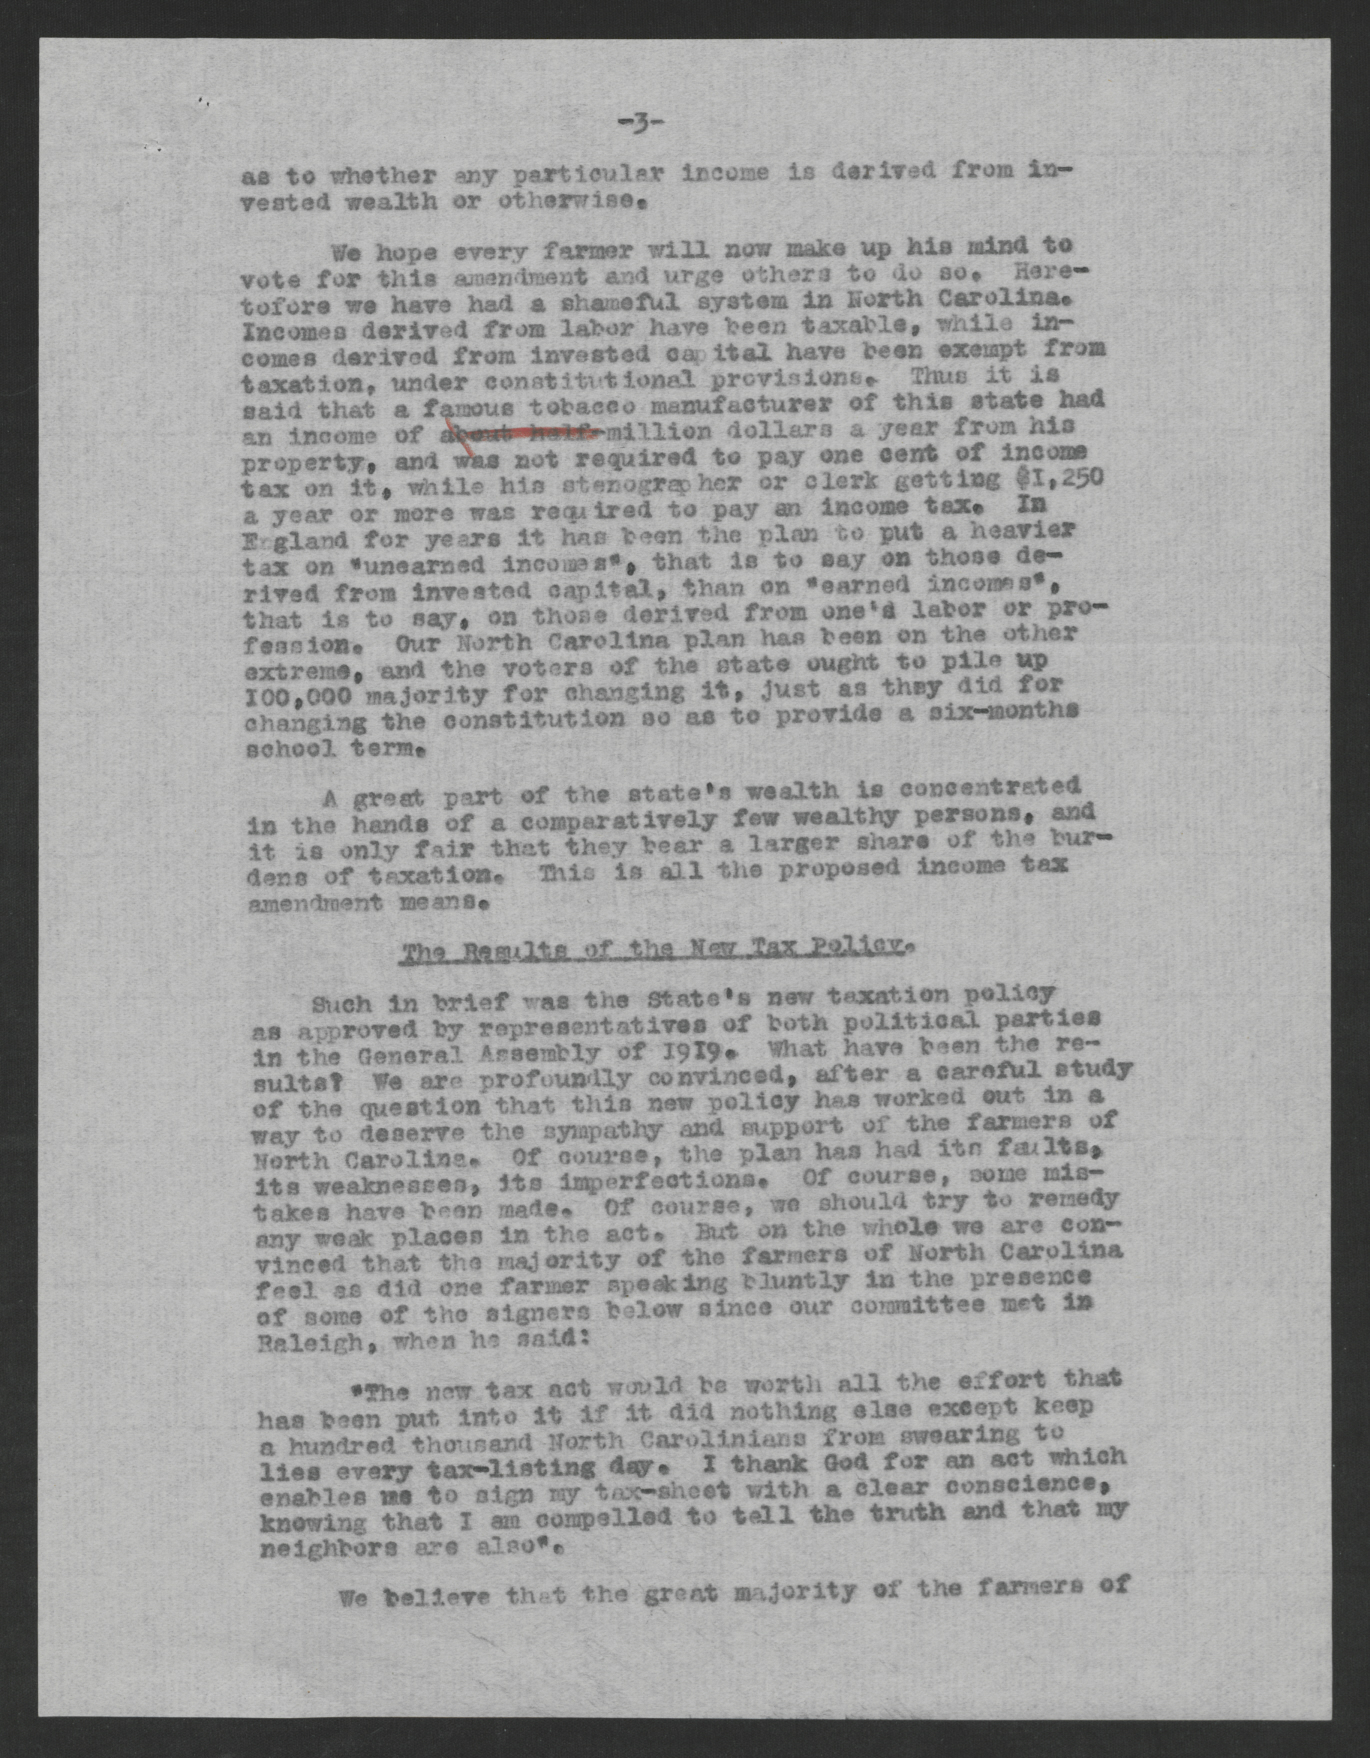 Report of the Legislative Committee of the North Carolina State Board of Agriculture, August 18, 1920, page 3